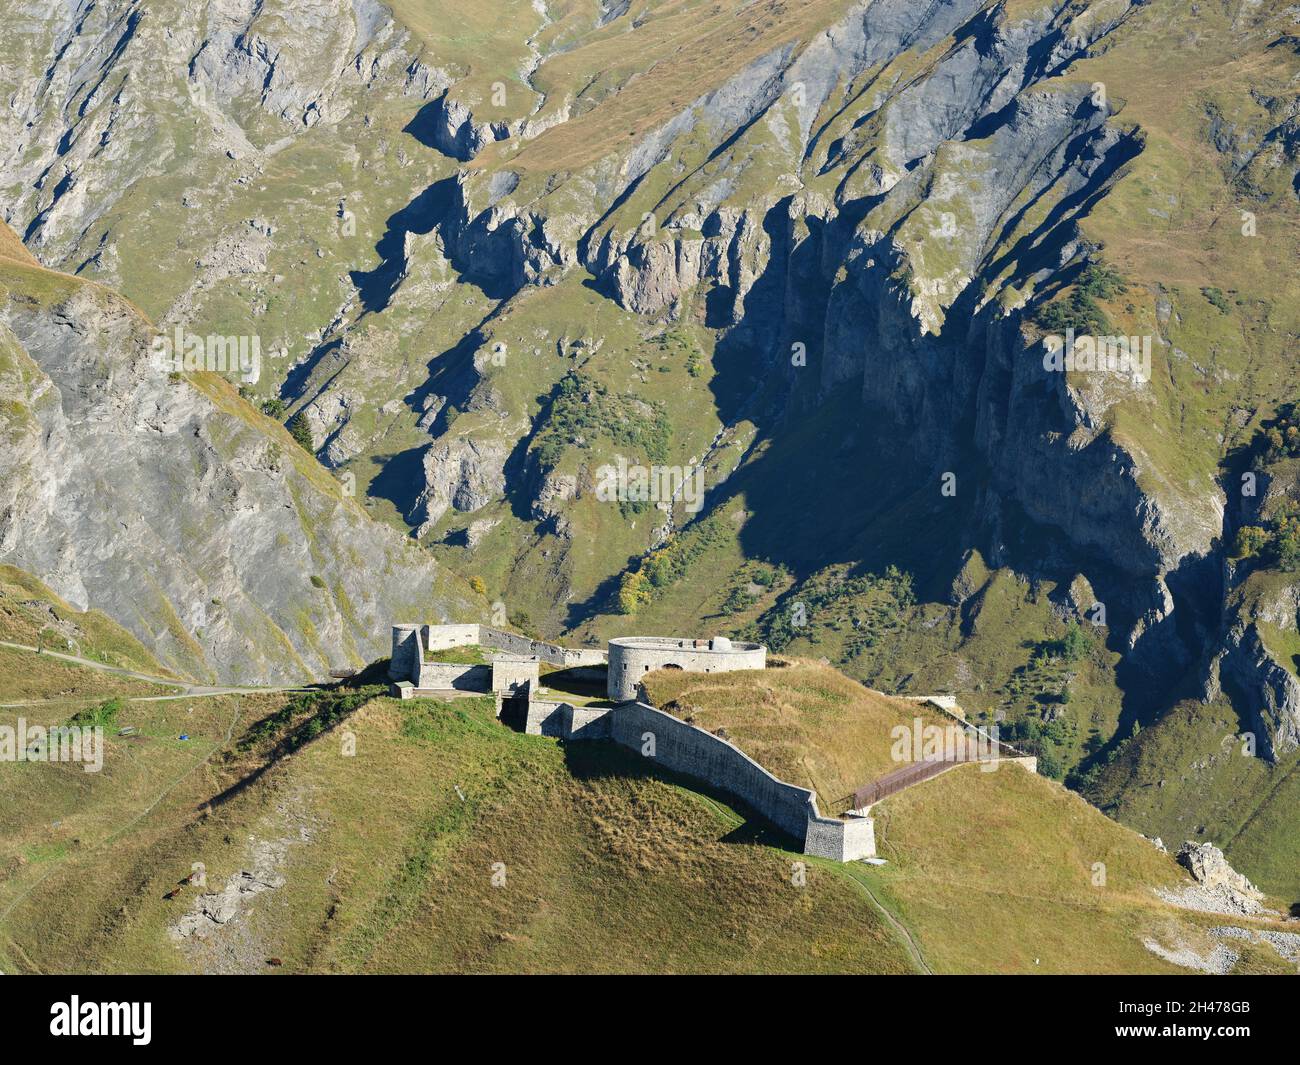 AERIAL VIEW. Military fortification from the late 1800s at an altitude of 2000m in the Tarentaise Valley. Fort de la Platte, Bourg-St-Maurice, France. Stock Photo